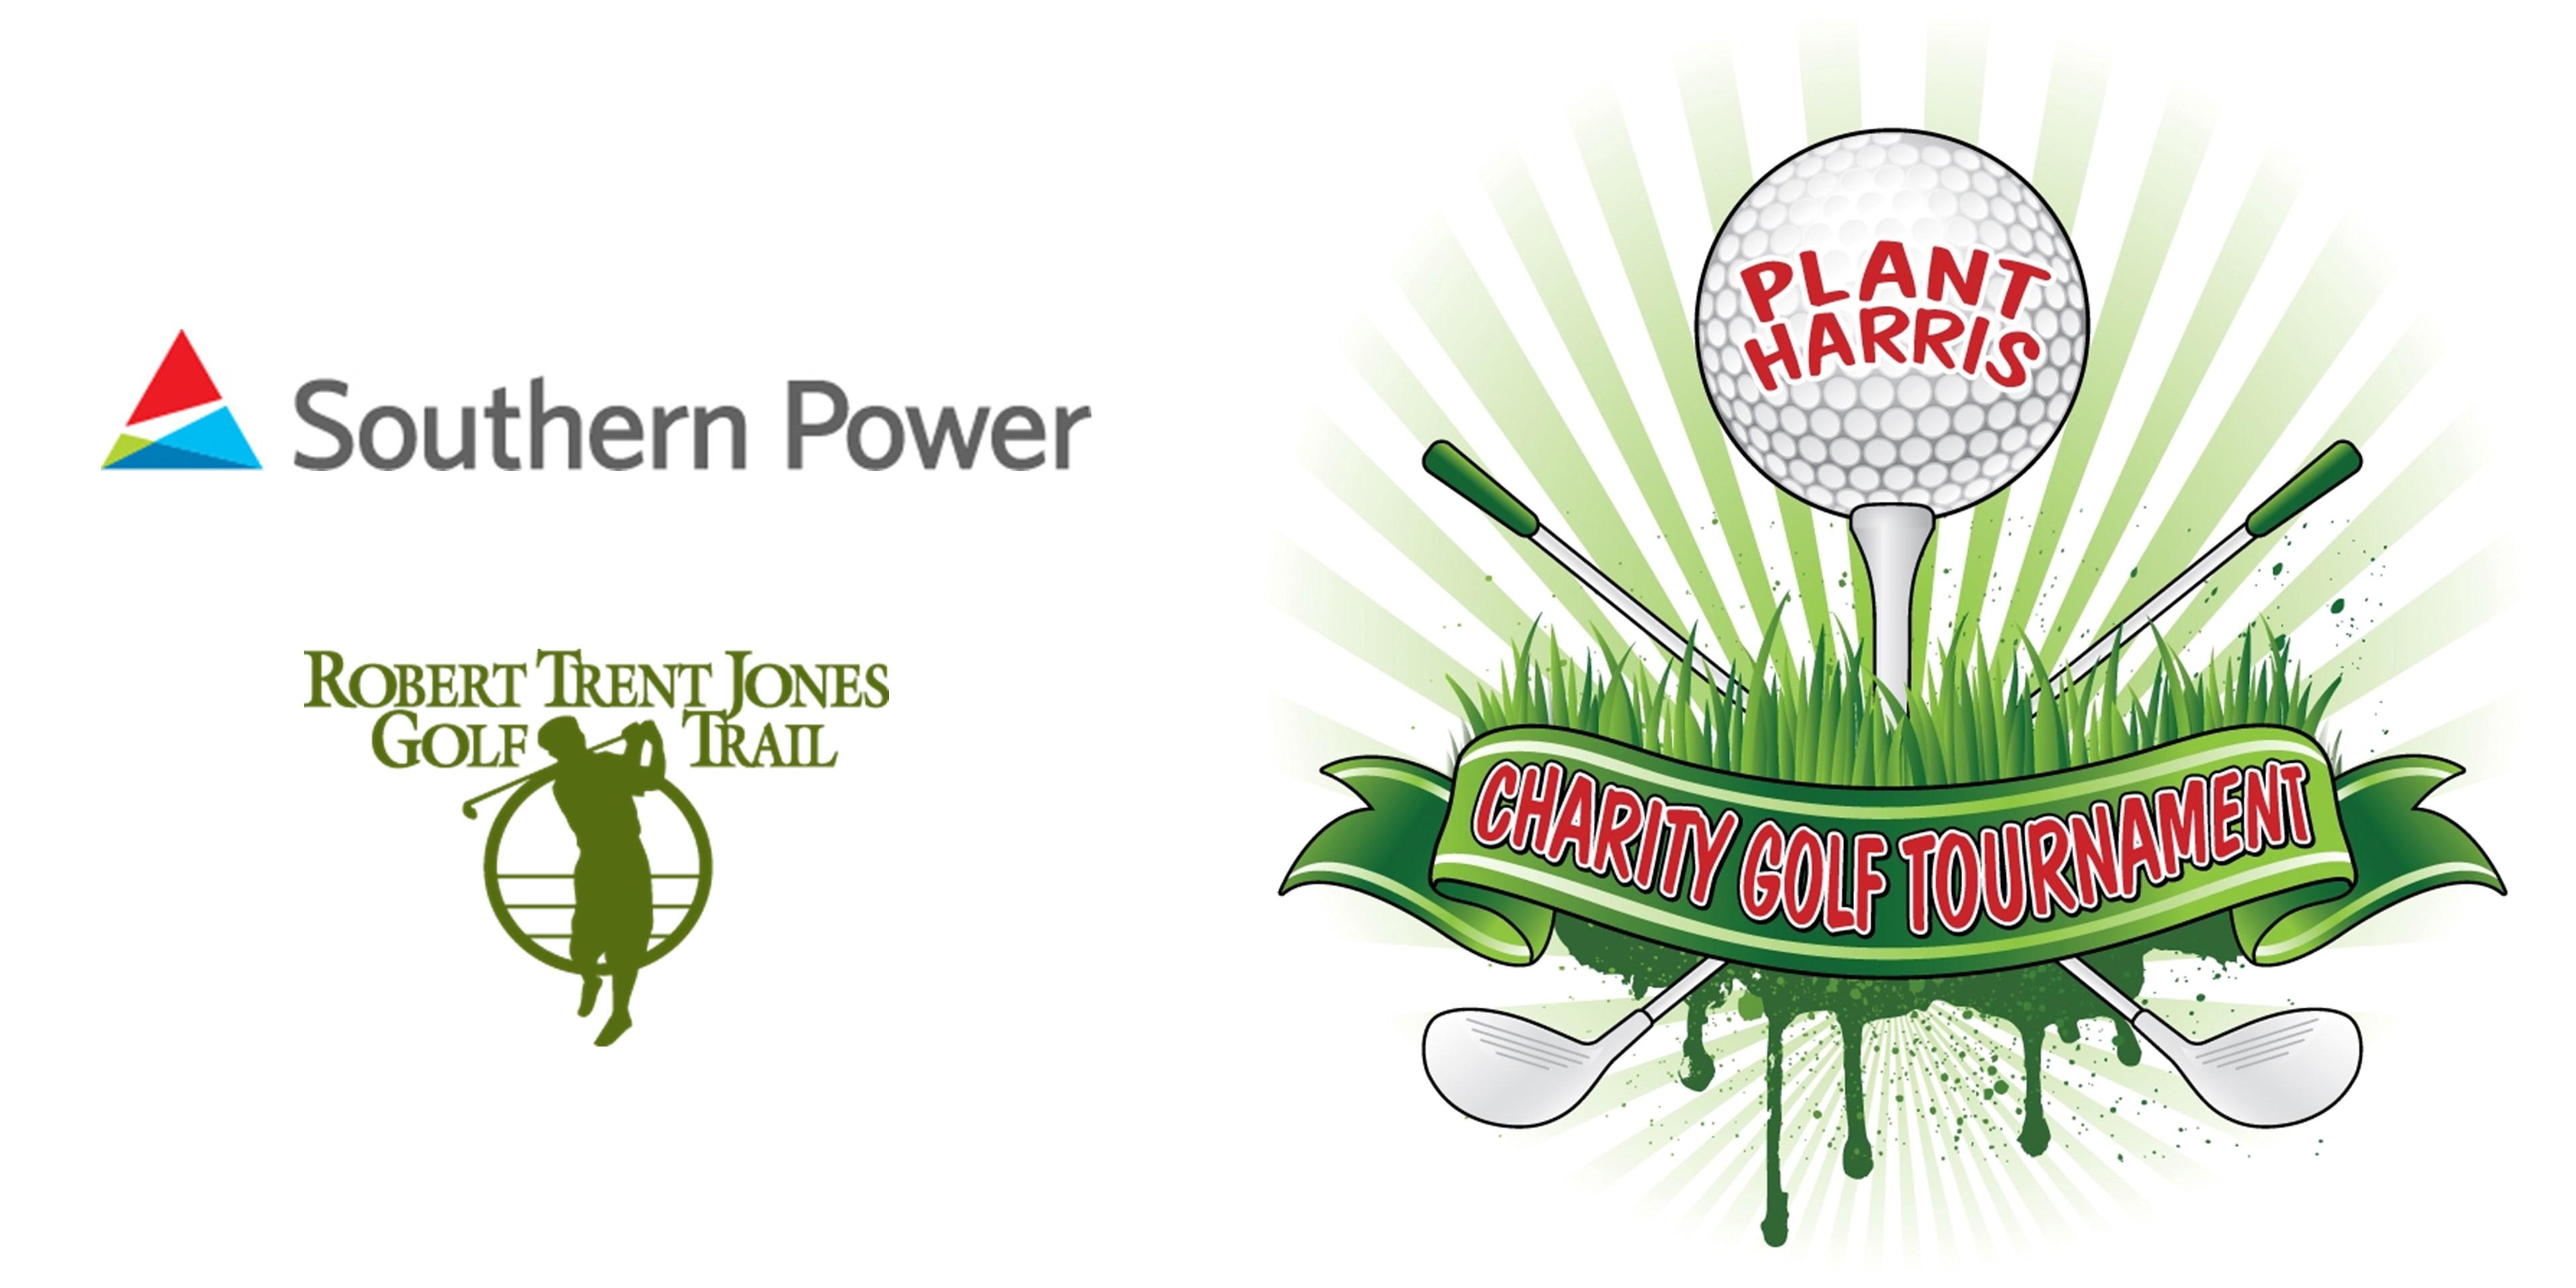 Southern Power Plant Harris 14th Annual Charity Golf Tournament